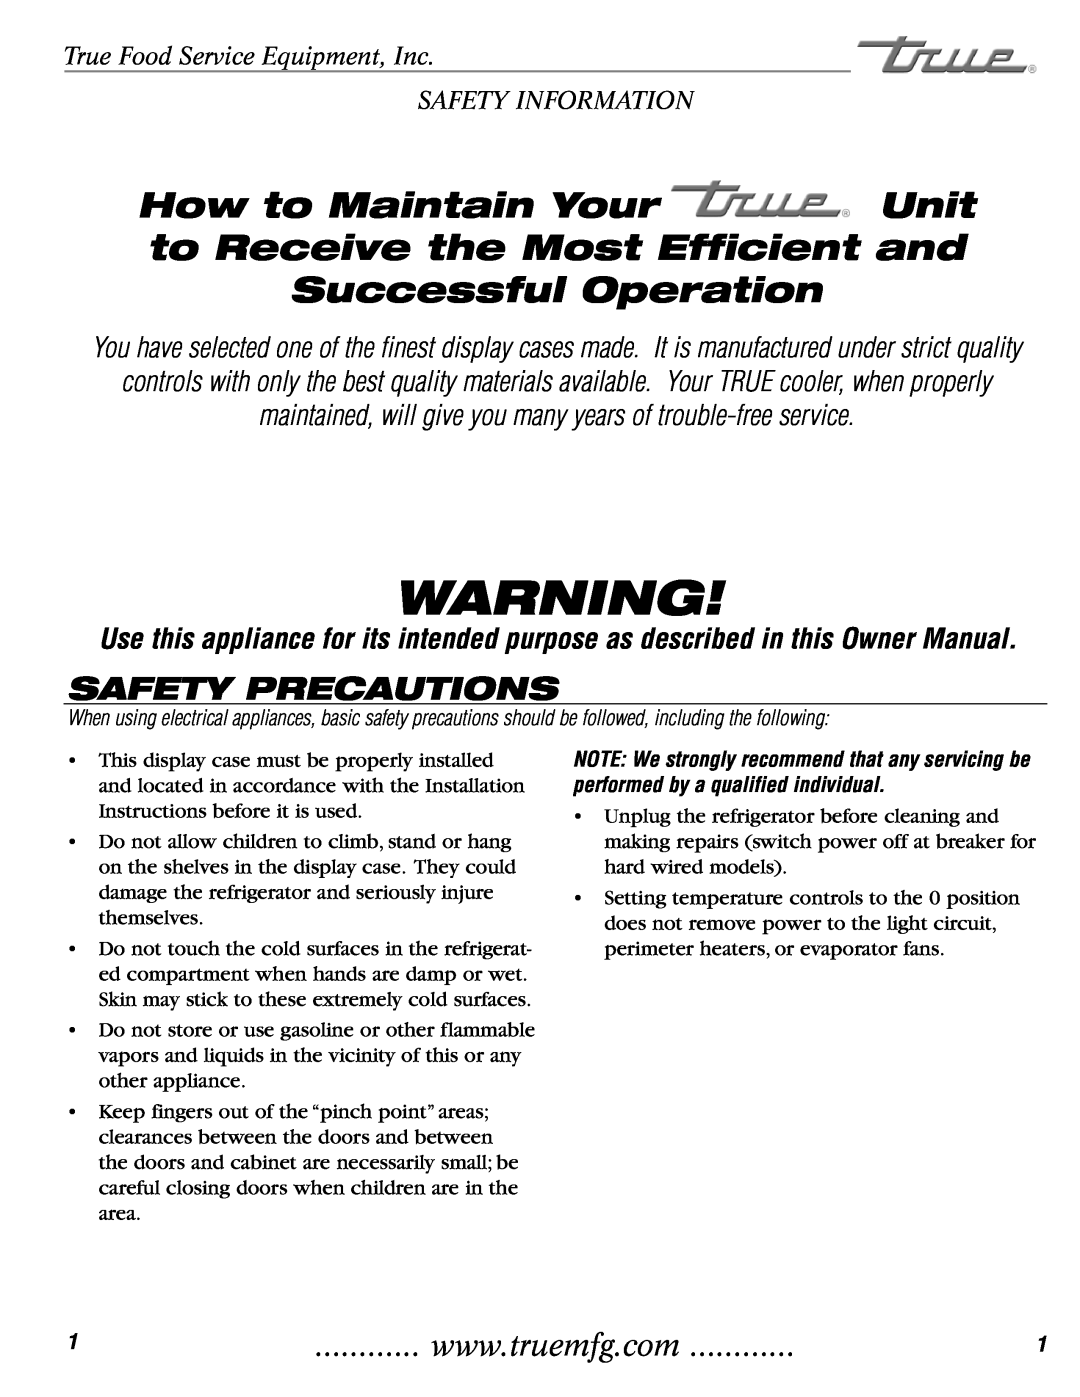 True Manufacturing Company TCGR-50-CD Safety Precautions, True Food Service Equipment, Inc SAFETY INFORMATION 